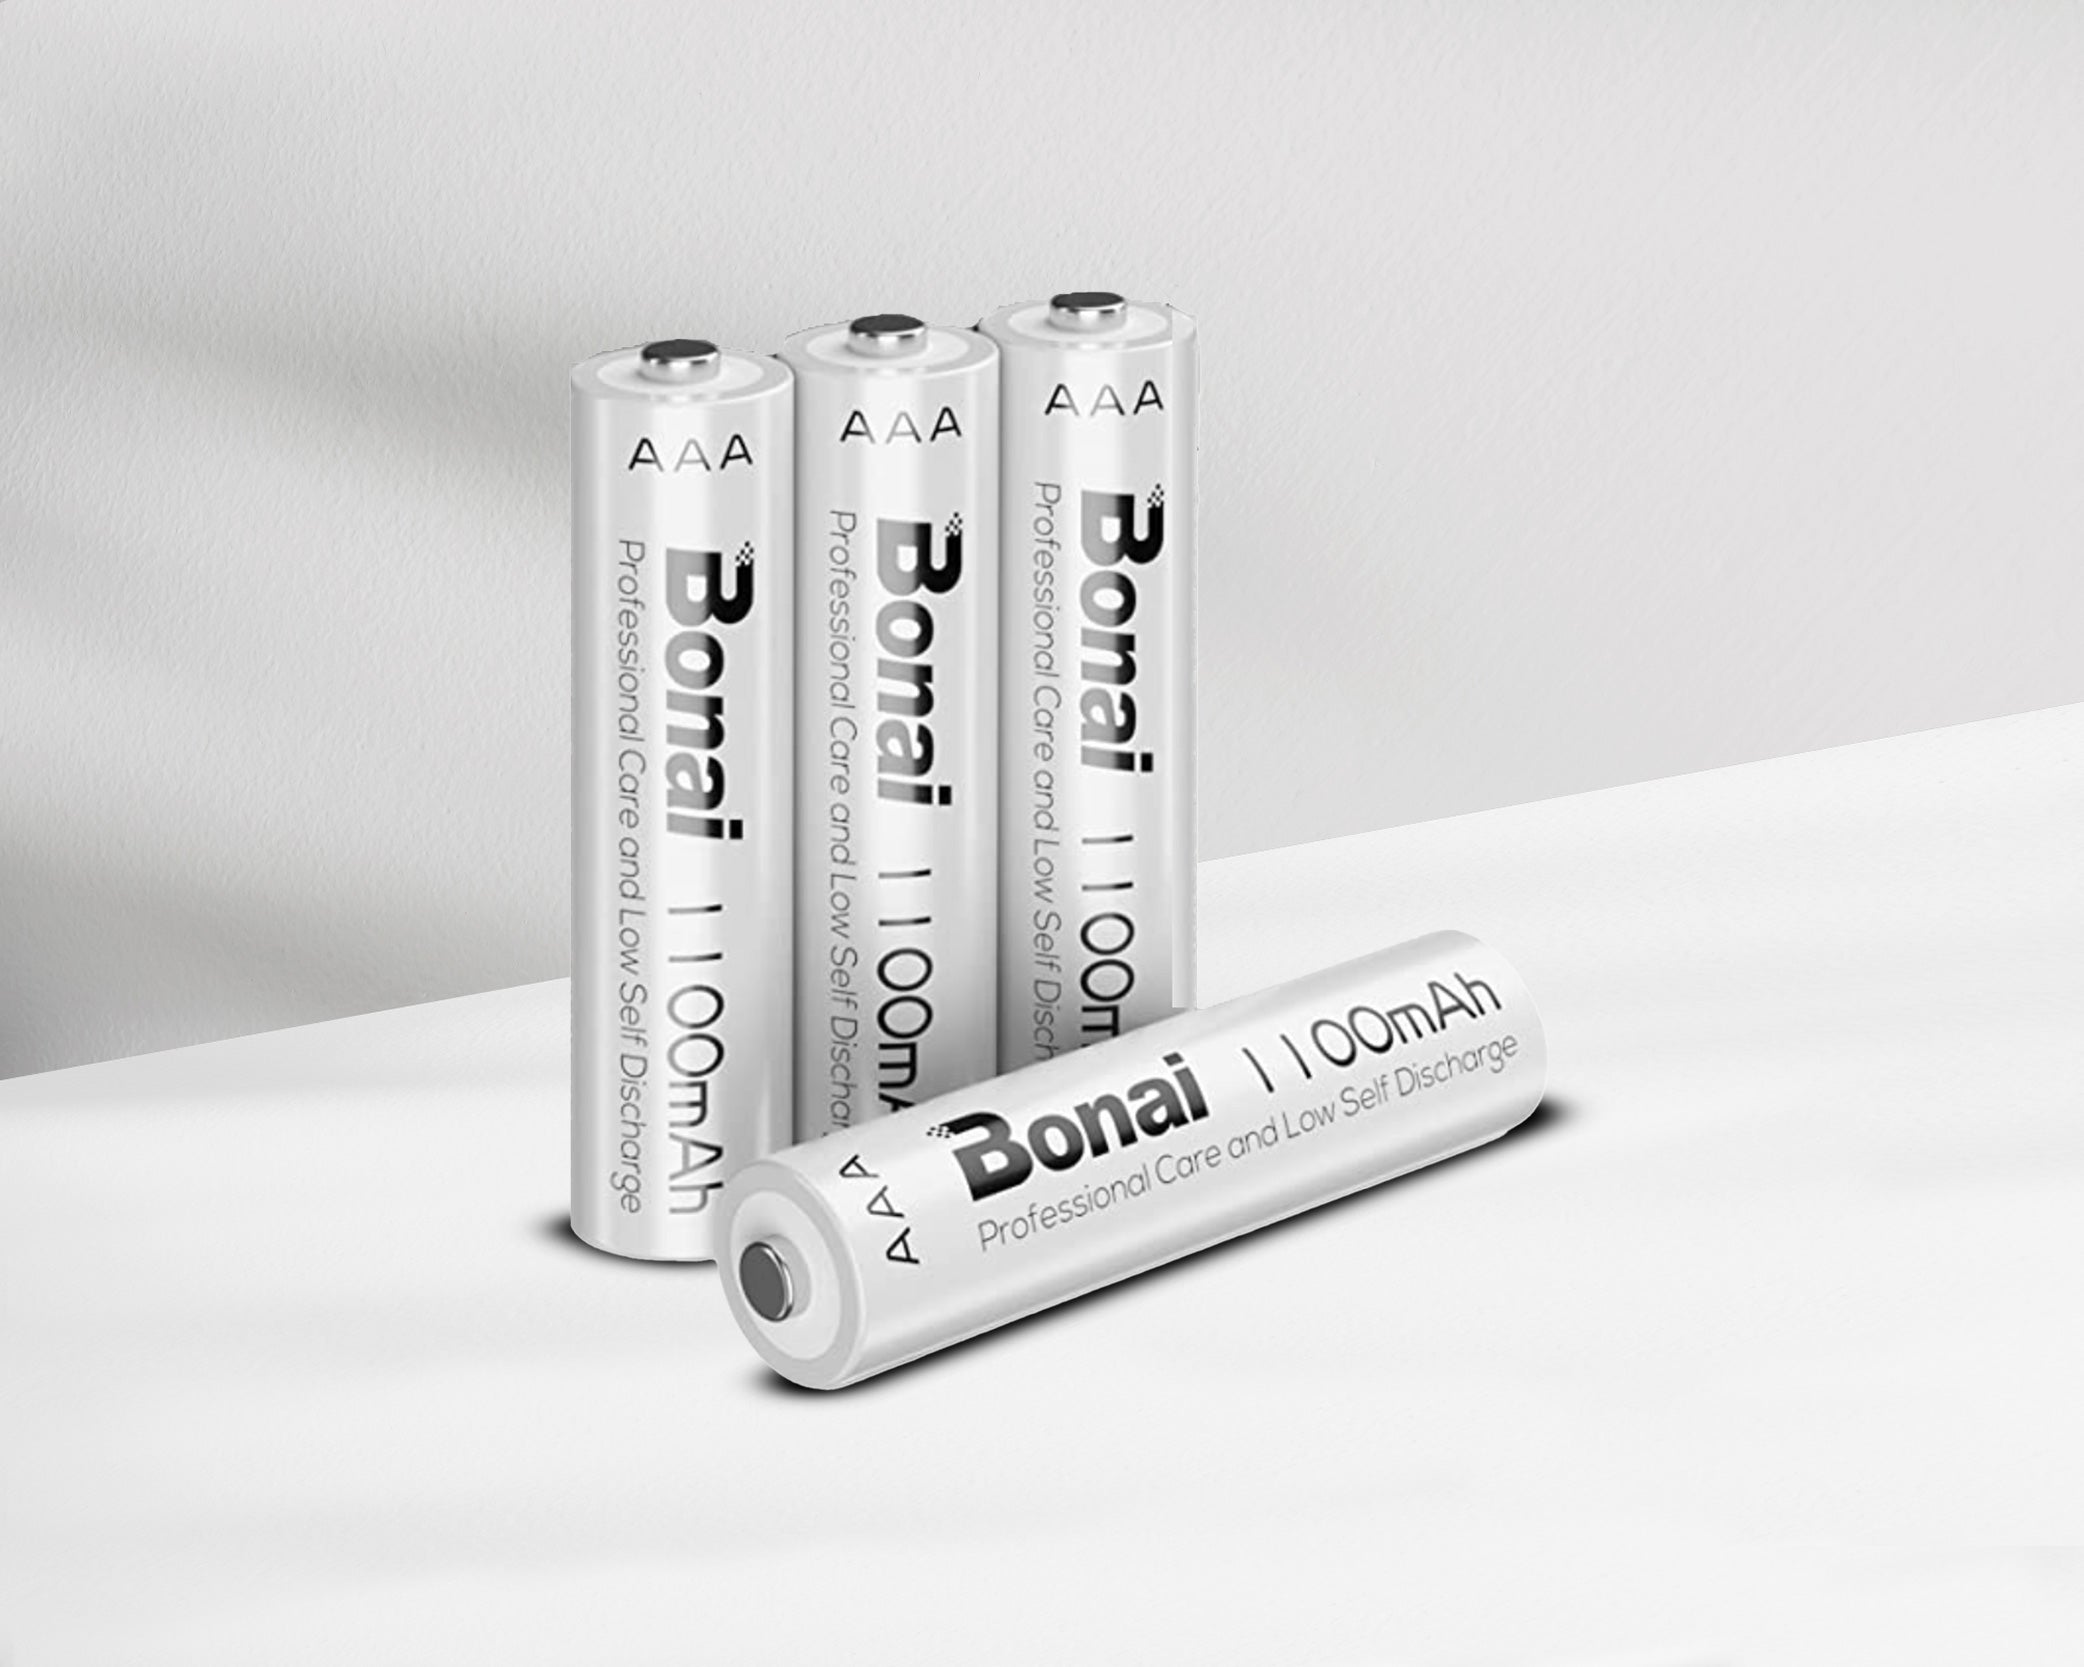 AAA 4 Pack Rechargeable Batteries by Bonai Battery – Paper Shoot Camera